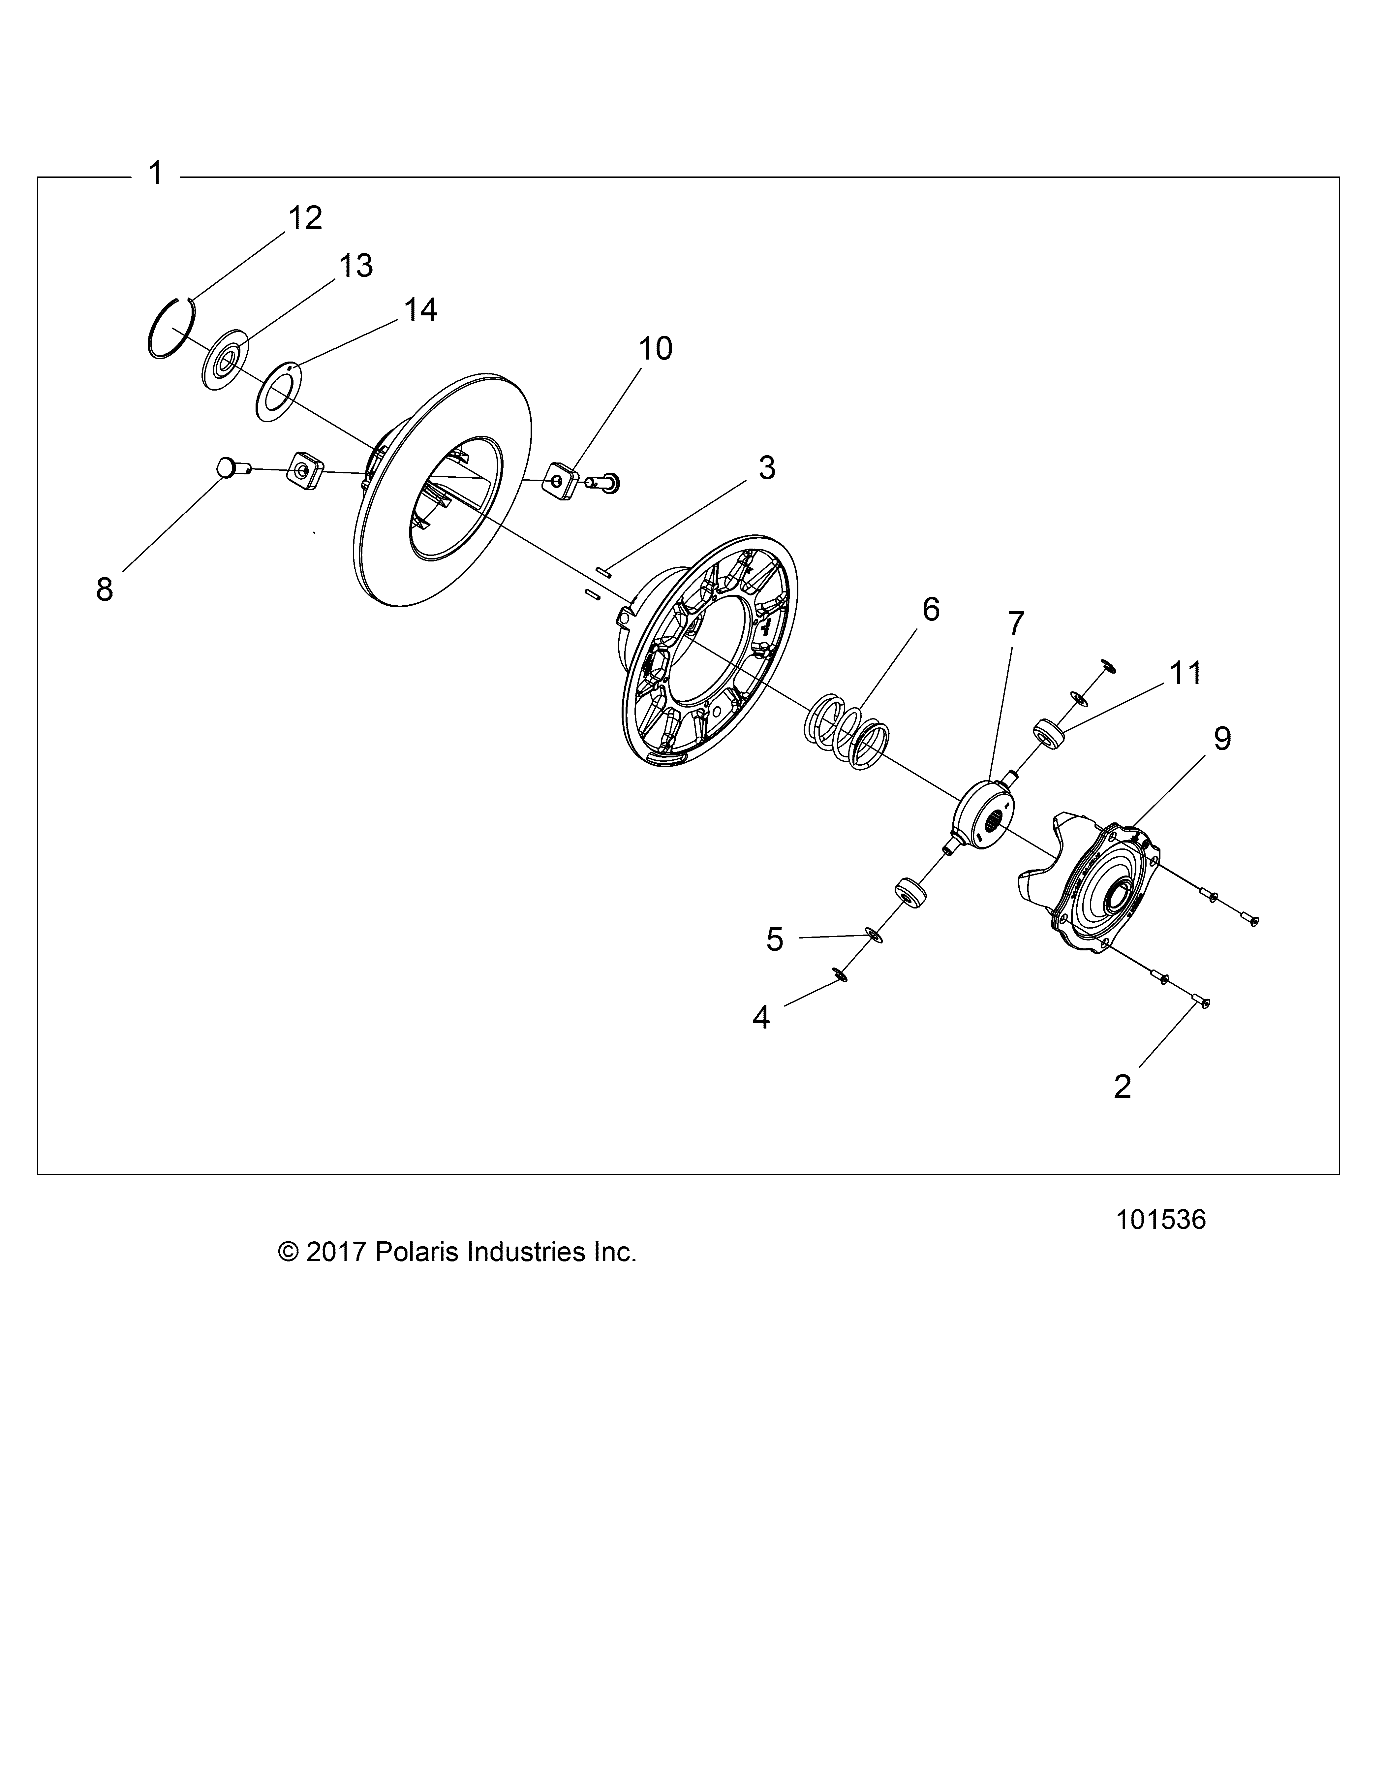 Part Number : 7045111 SPRING-DRIVEN SERVICE